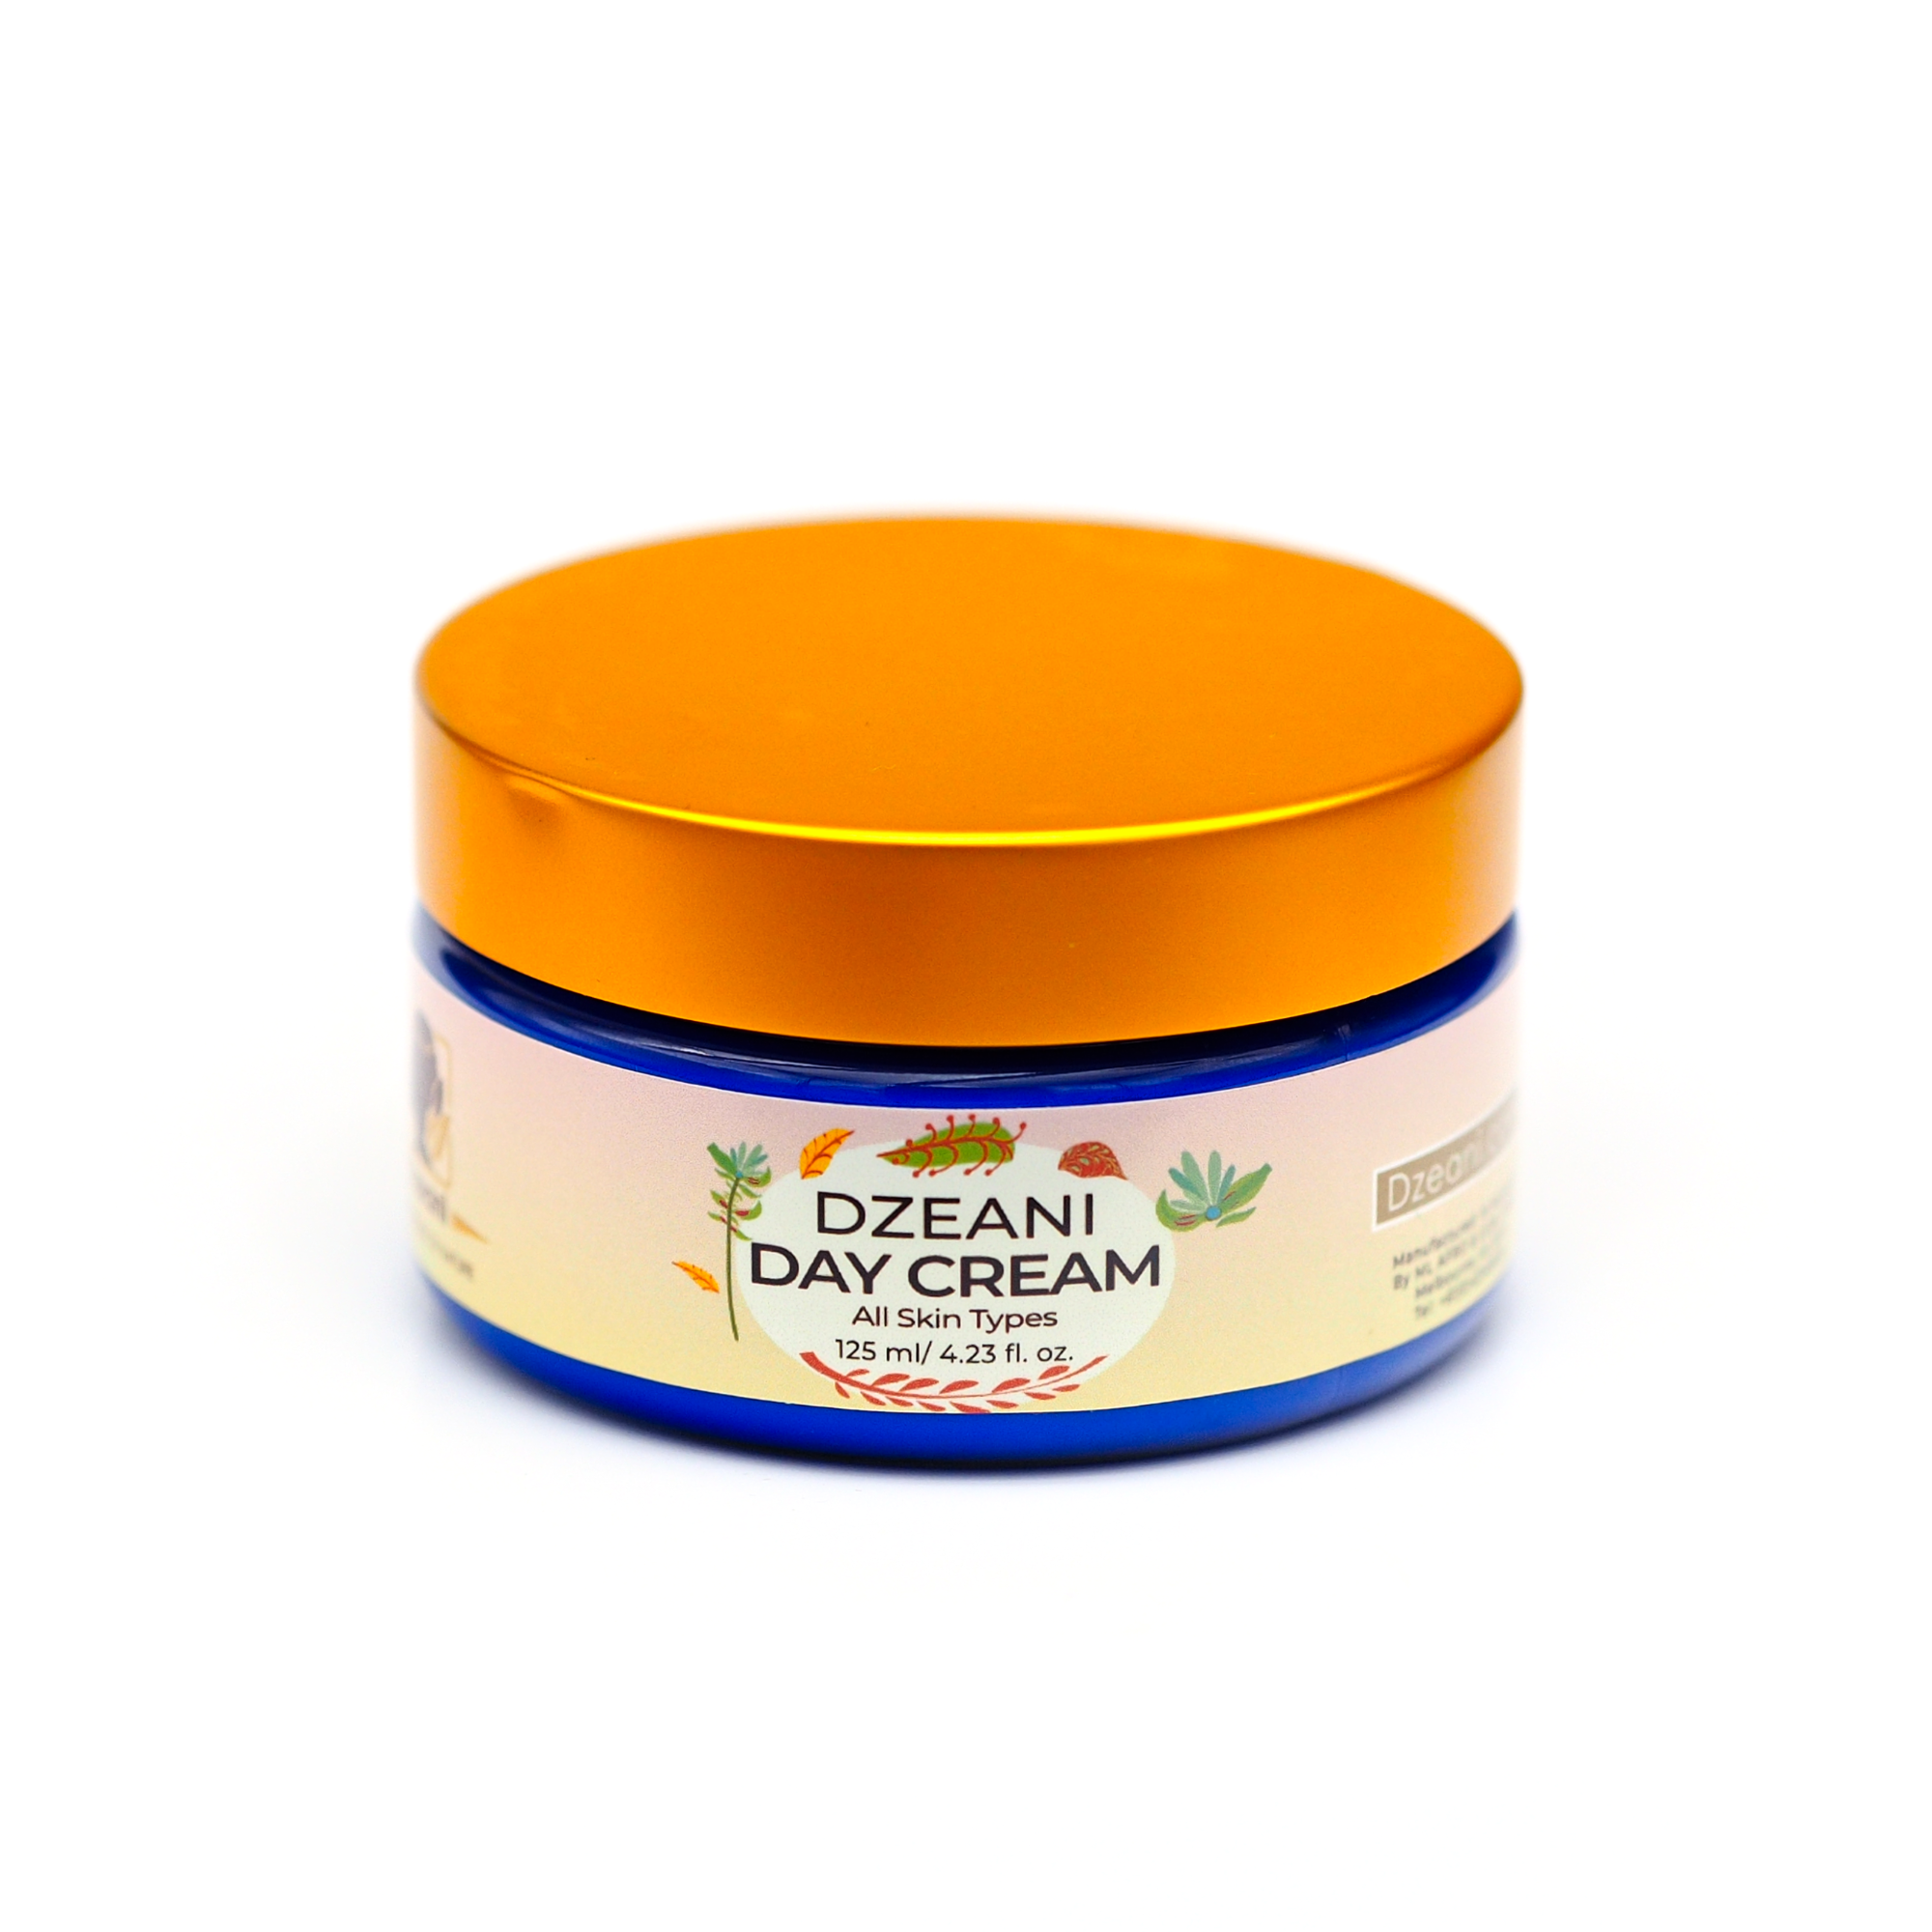 Dzeani Day Cream combines Vitamins C, B3, and E with botanical butters and oils to nourish and soften the skin.